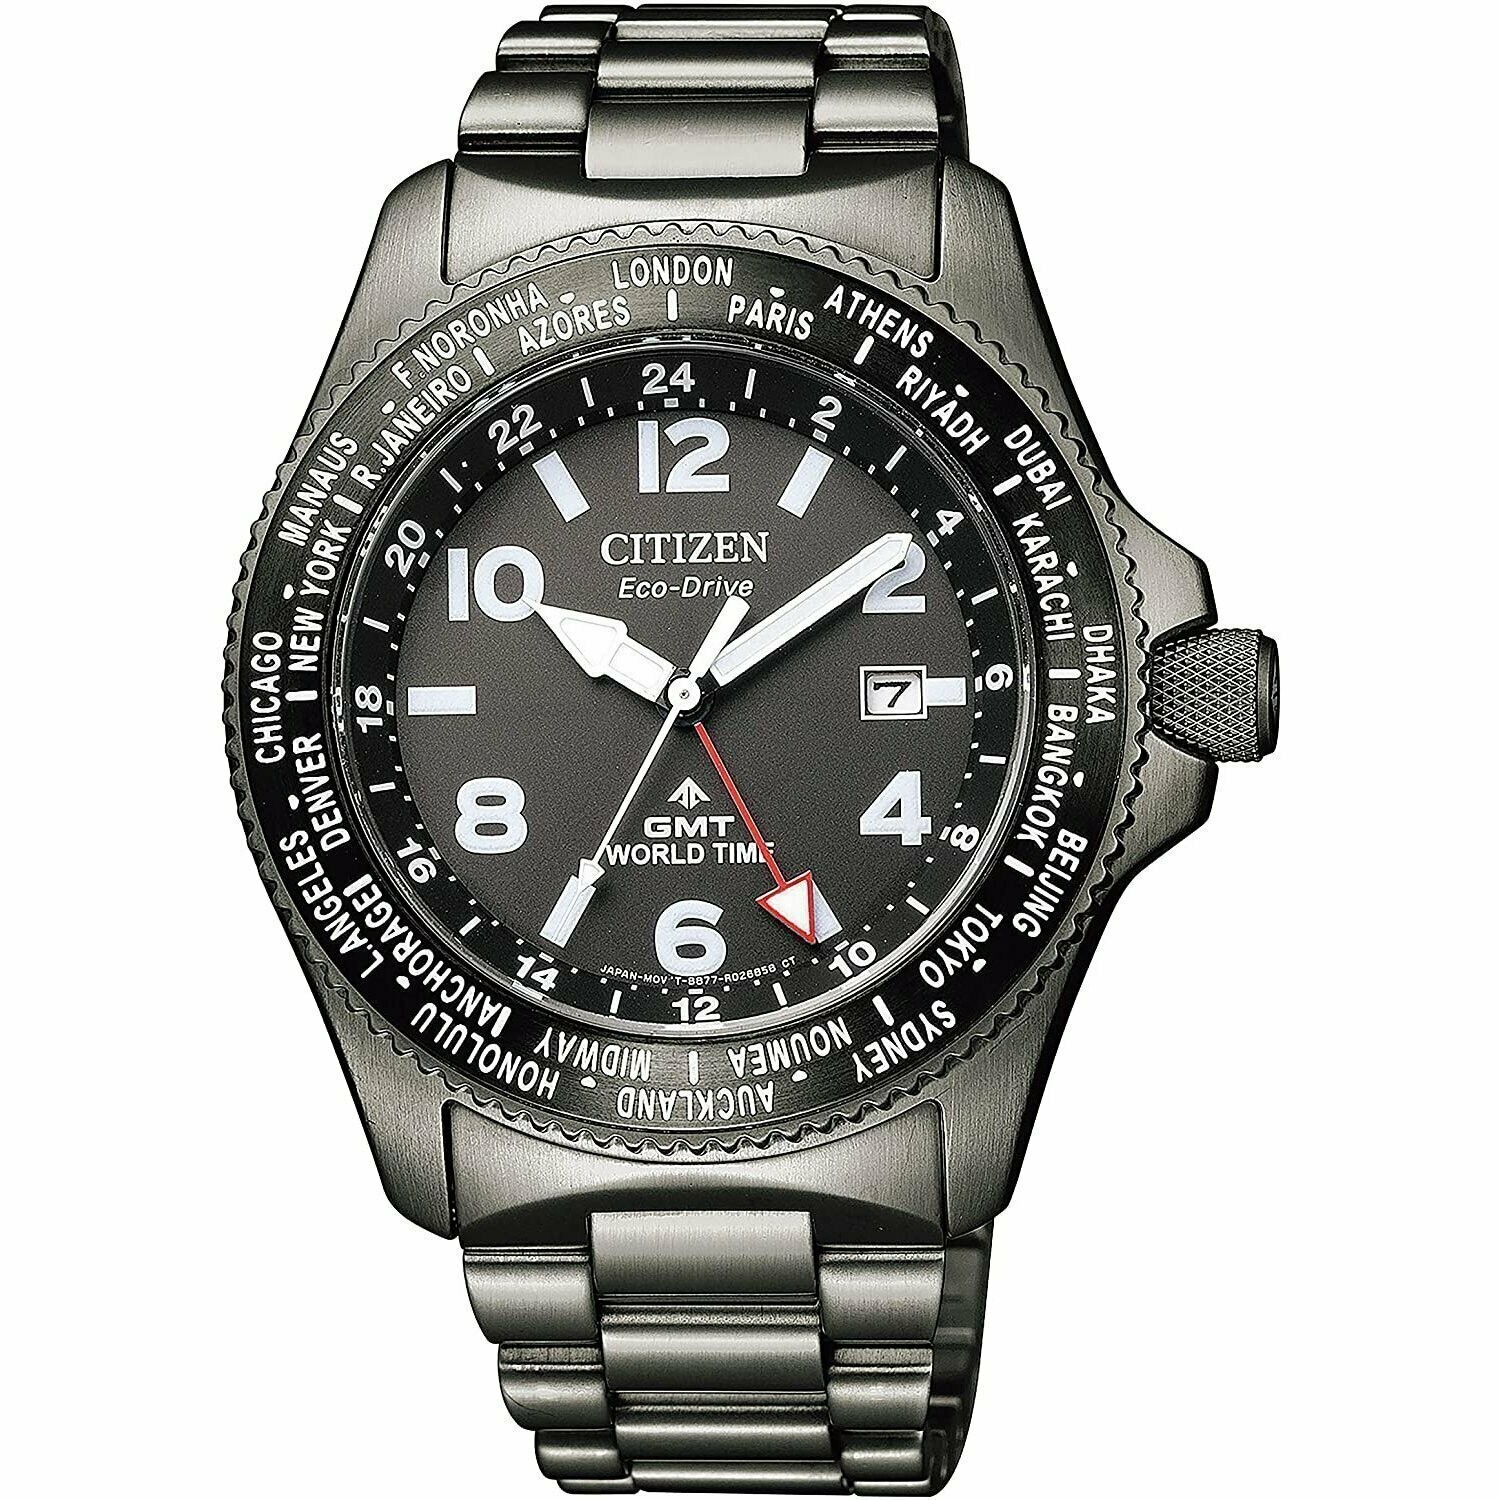 CITIZEN PROMASTER WORLD TIME GMT